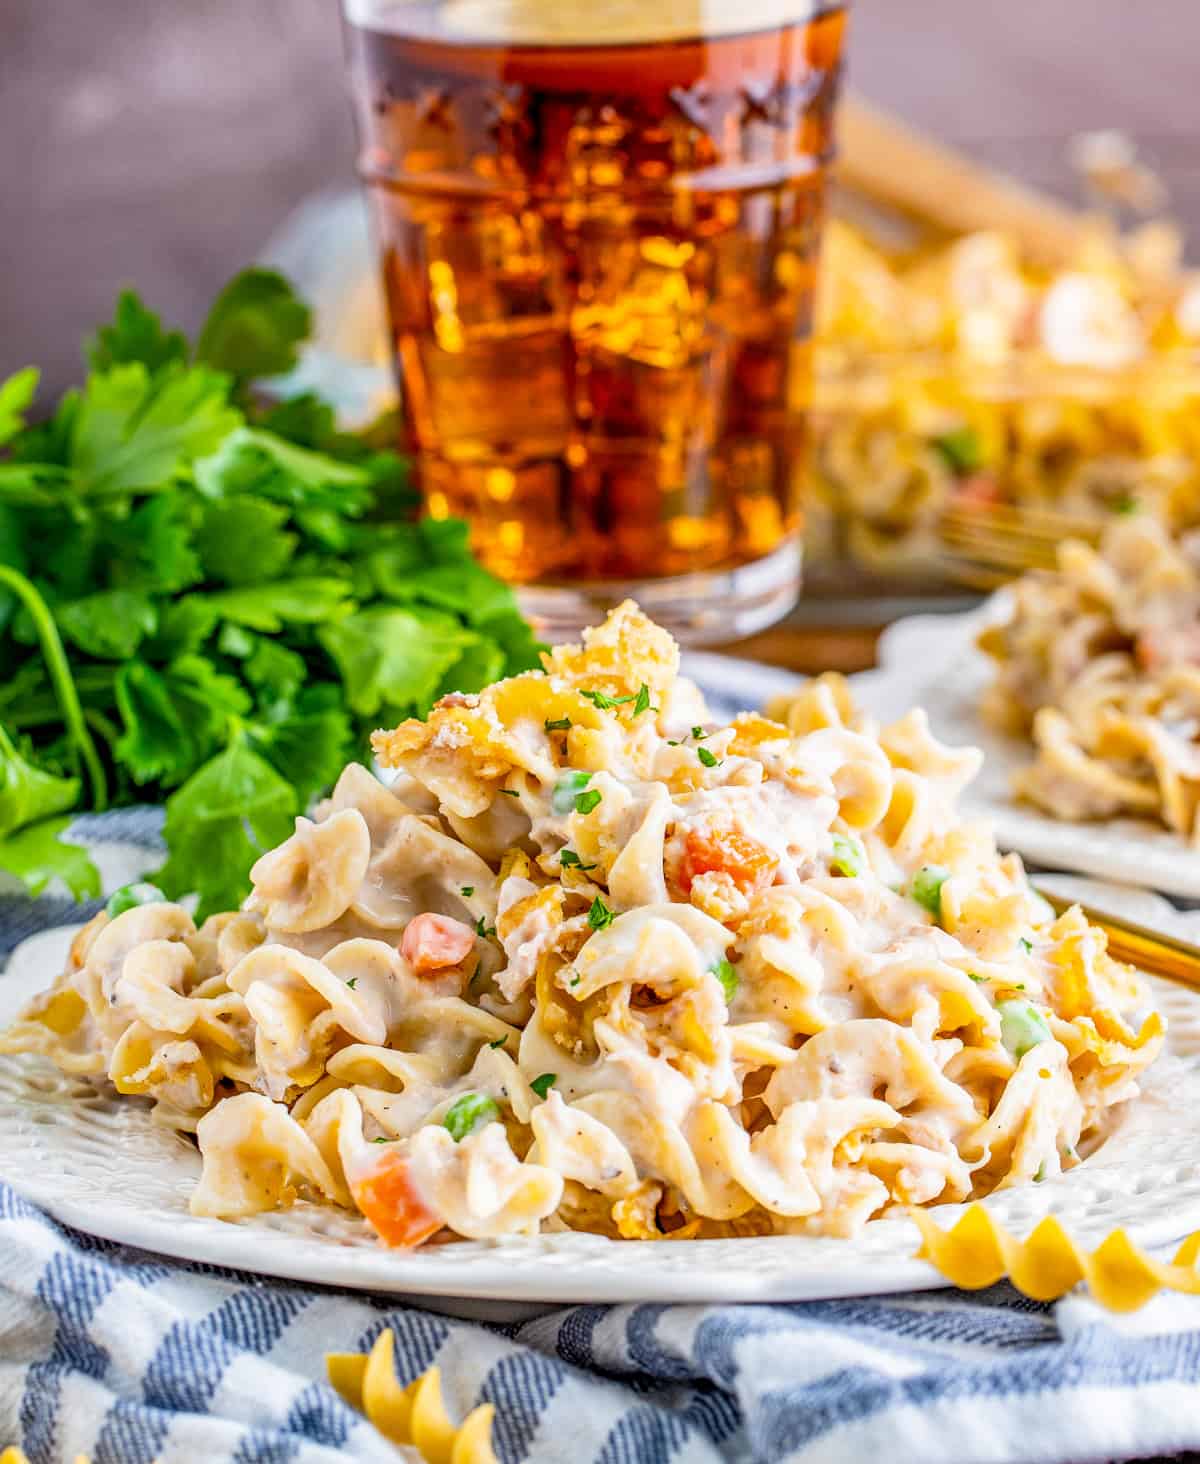 Tuna Noodle Casserole Recipe on white plate with parsley and a drink in the background.